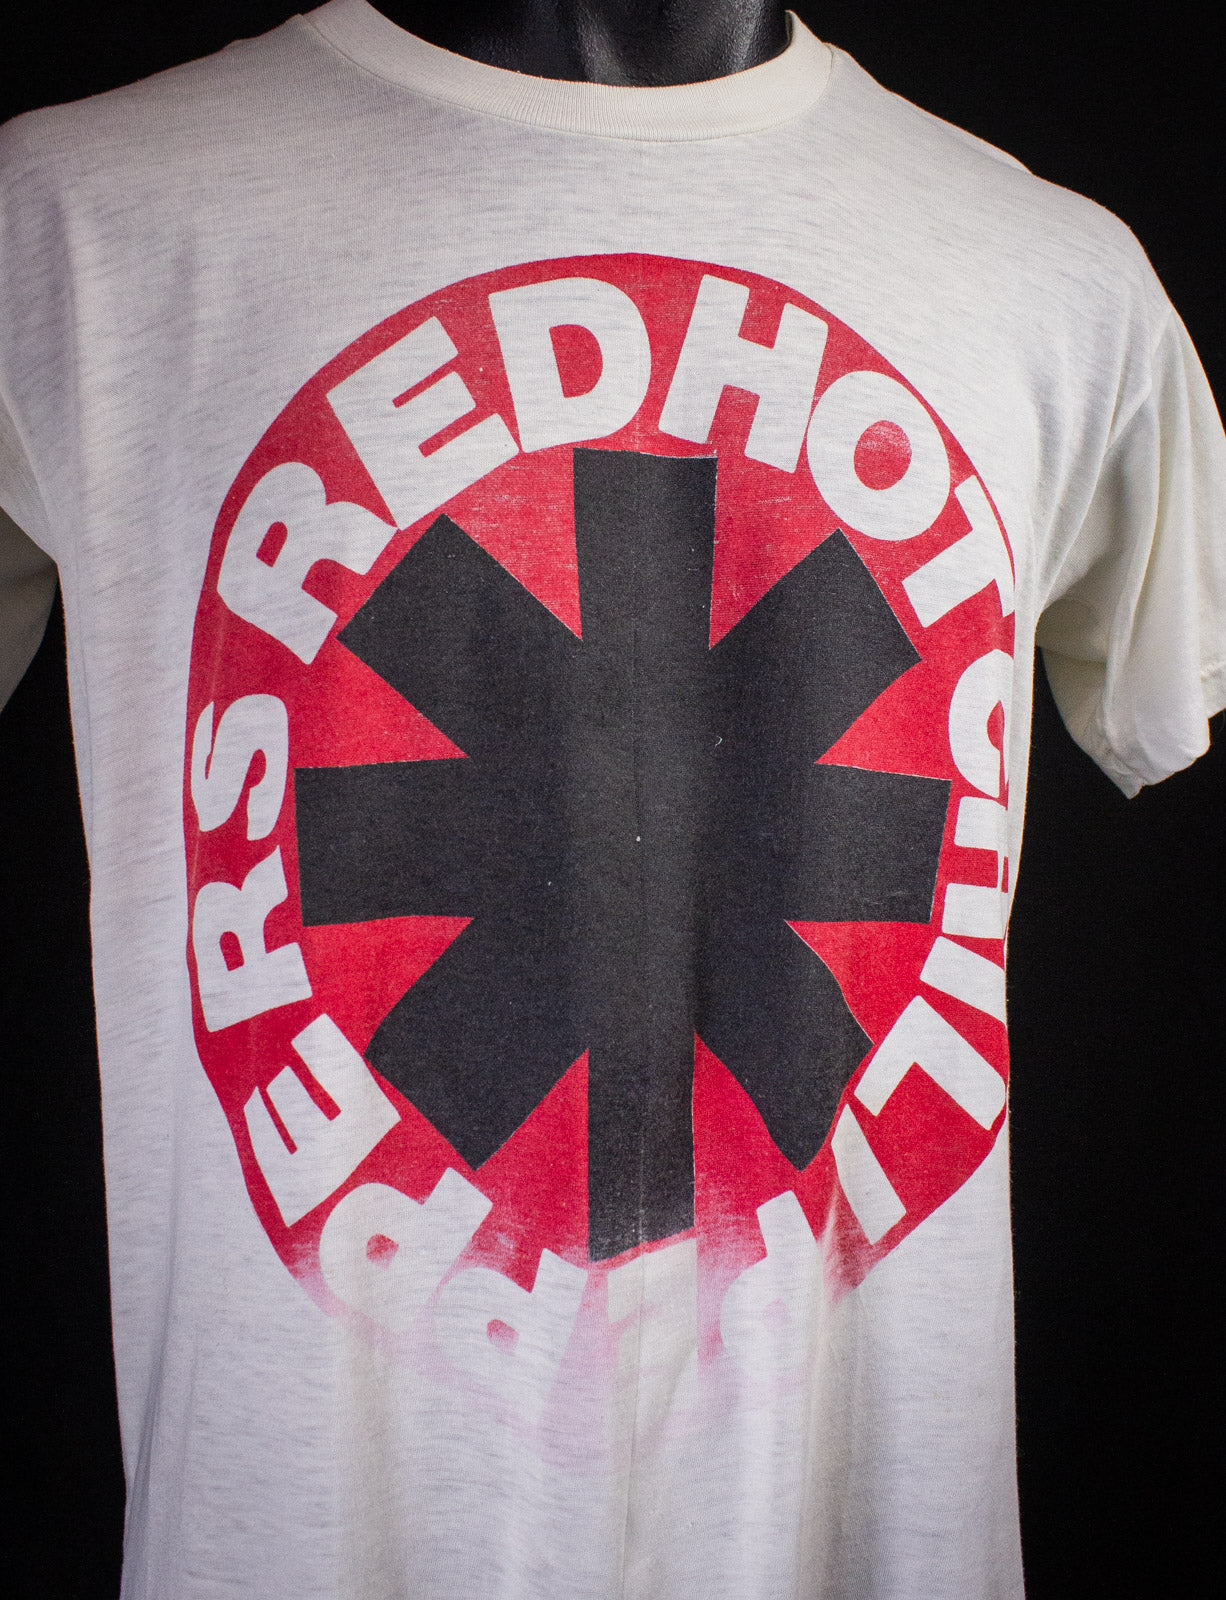 Vintage Red Hot Chili Peppers Logo Concert T Shirt 80s White Medium